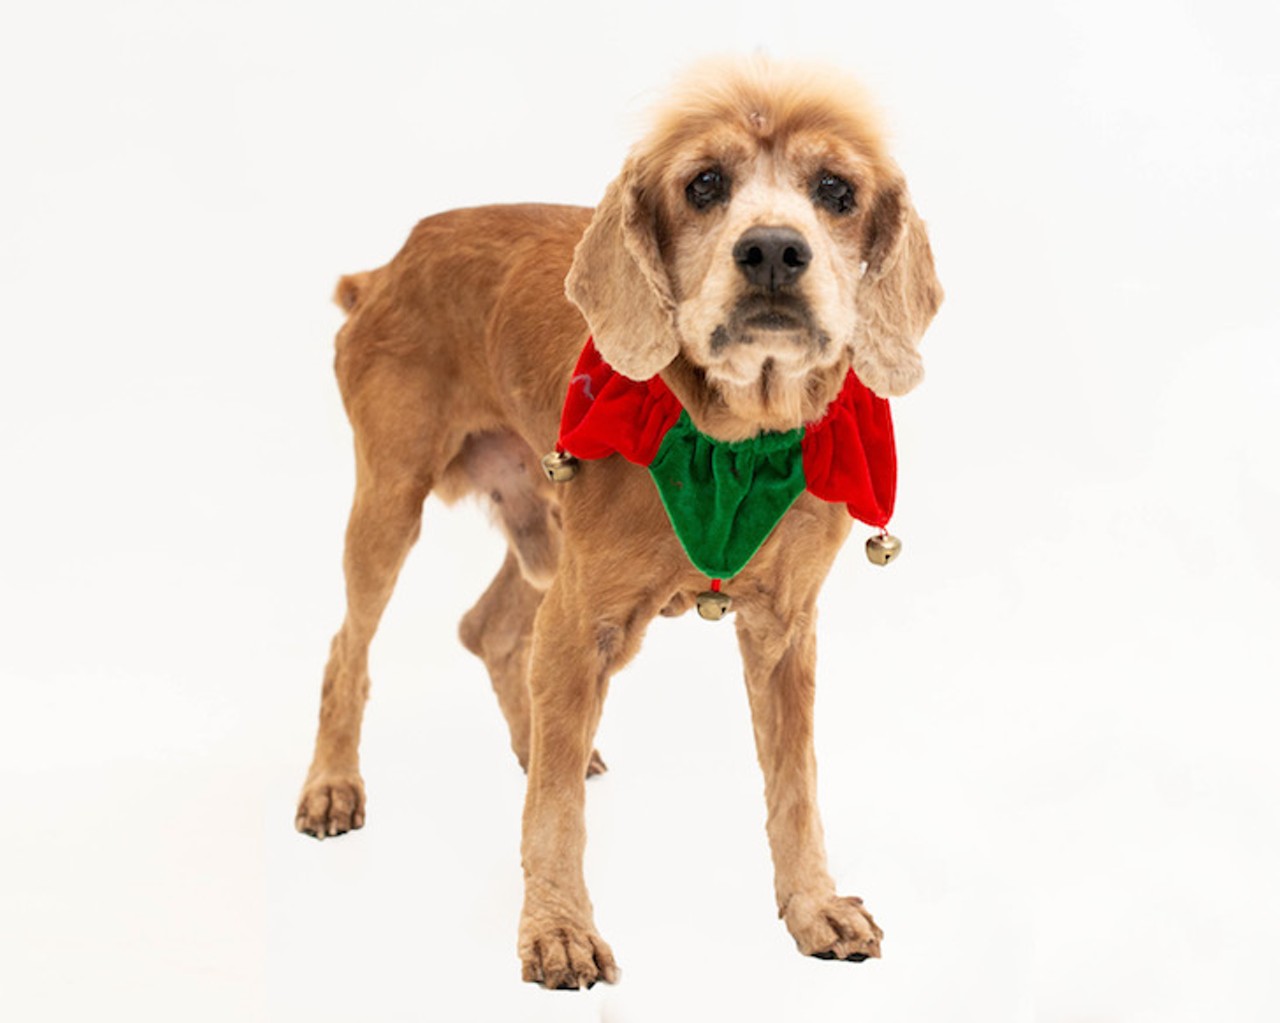 These adoptable little Santa's helpers in Orange County need homes for the holidays